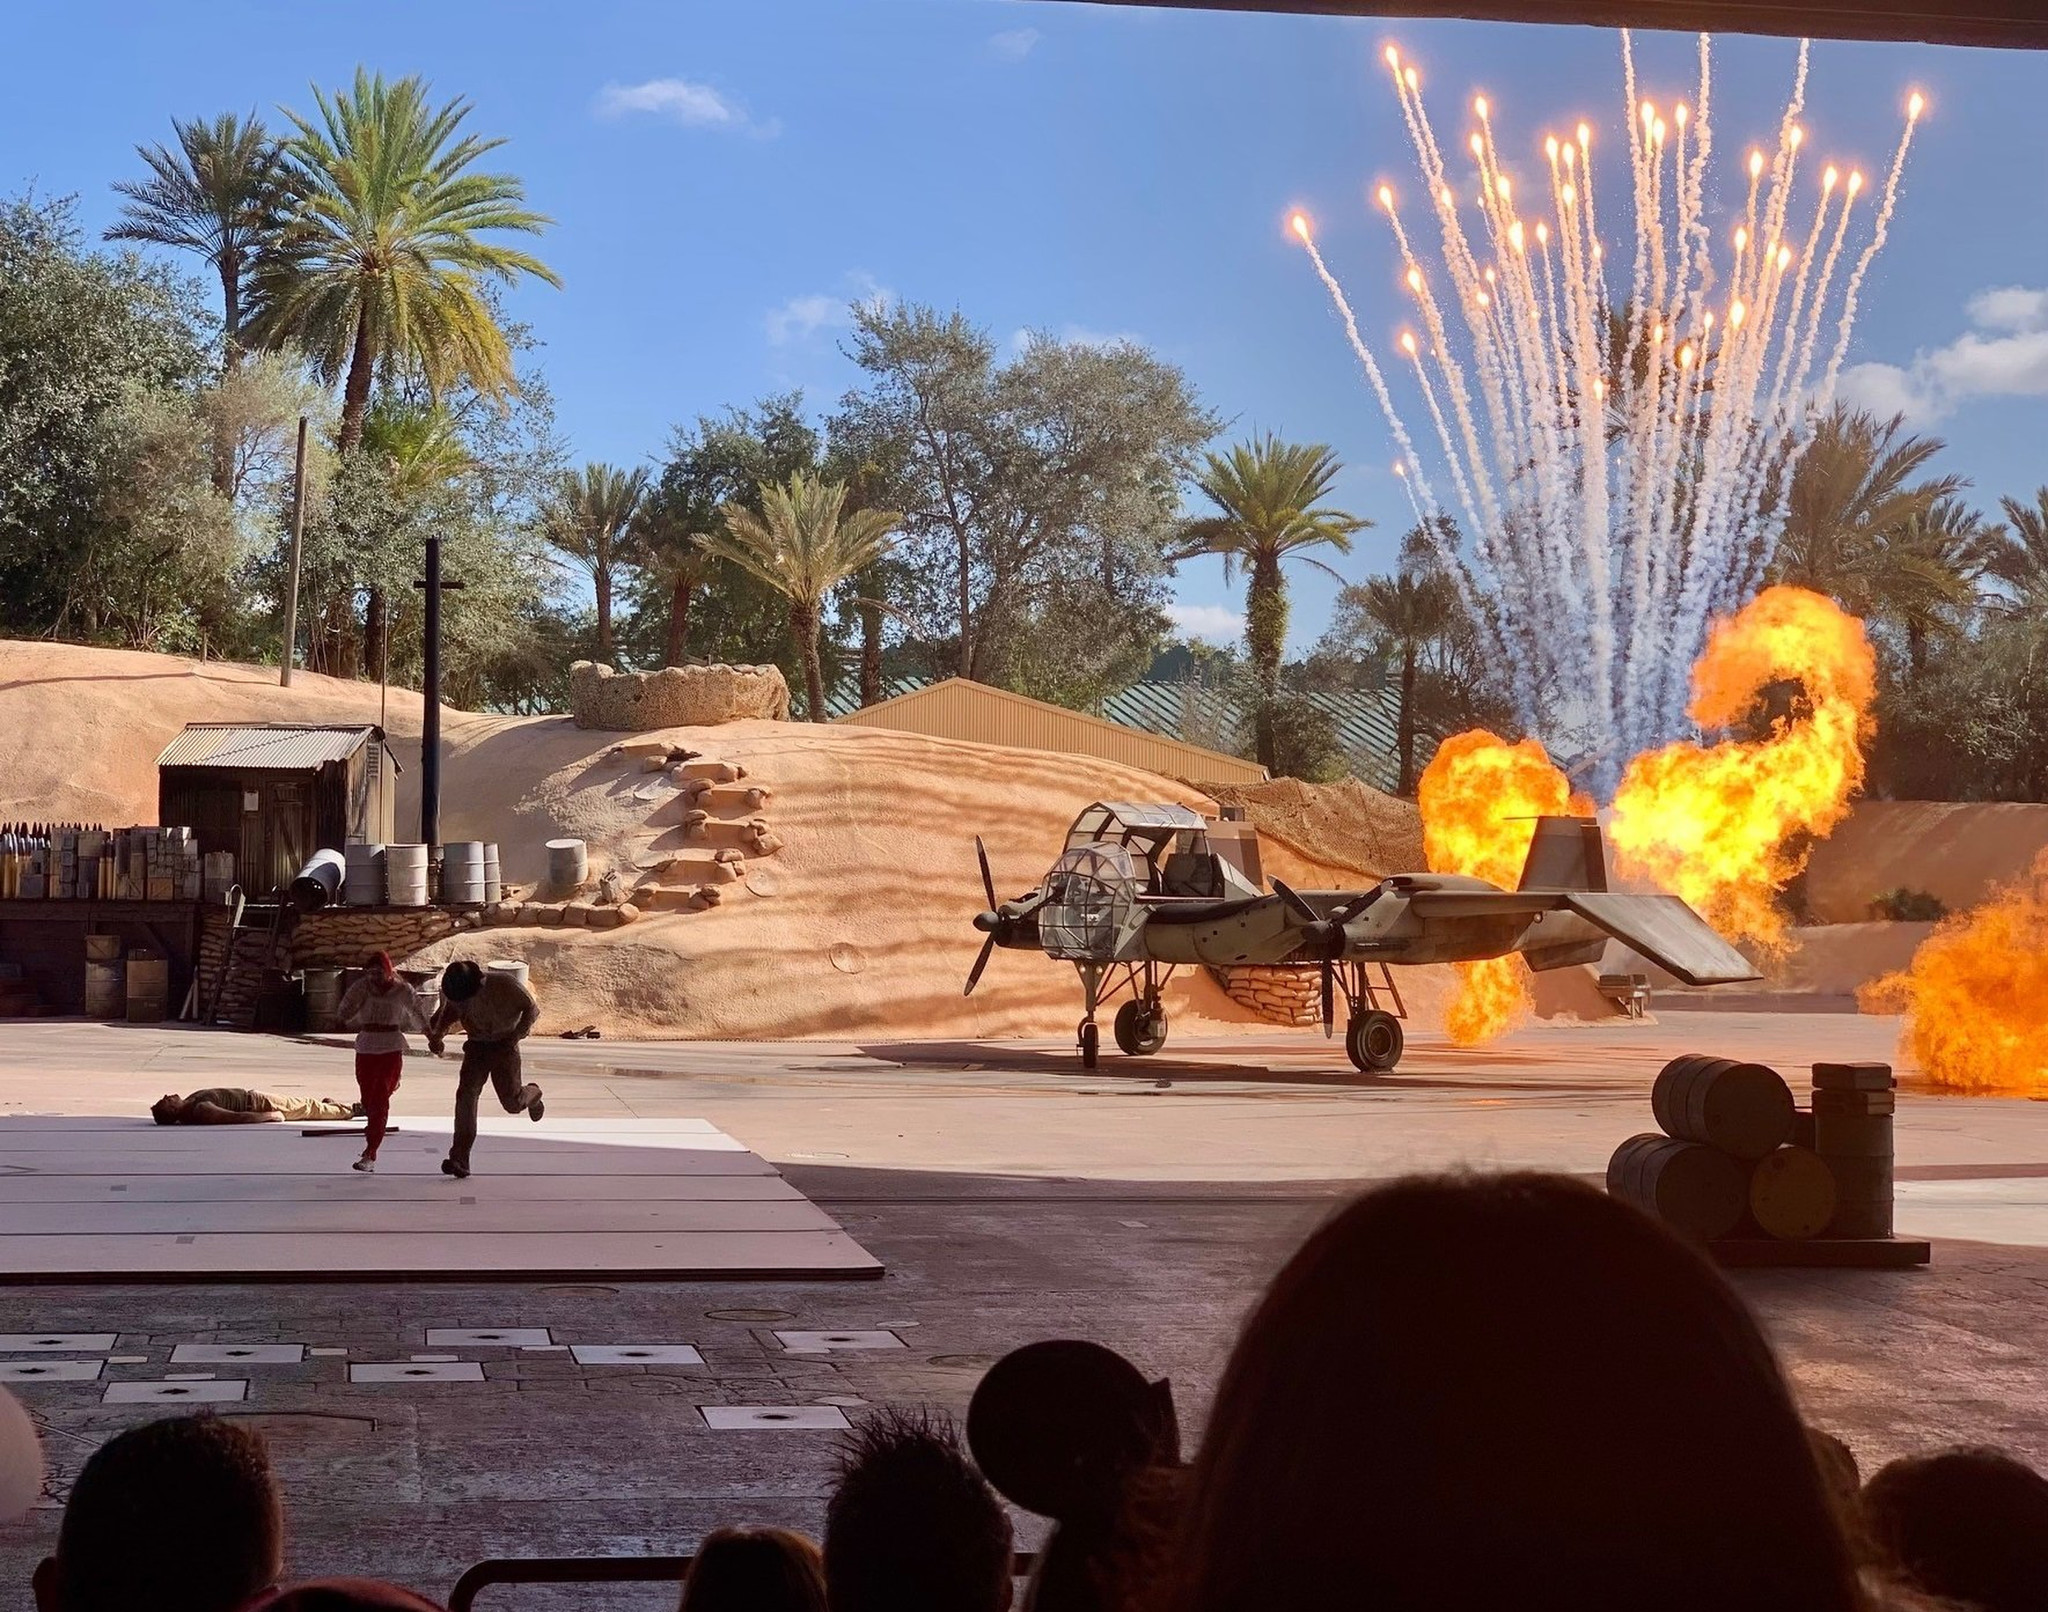 Disney World: Indiana Jones stunt show is back with a bang